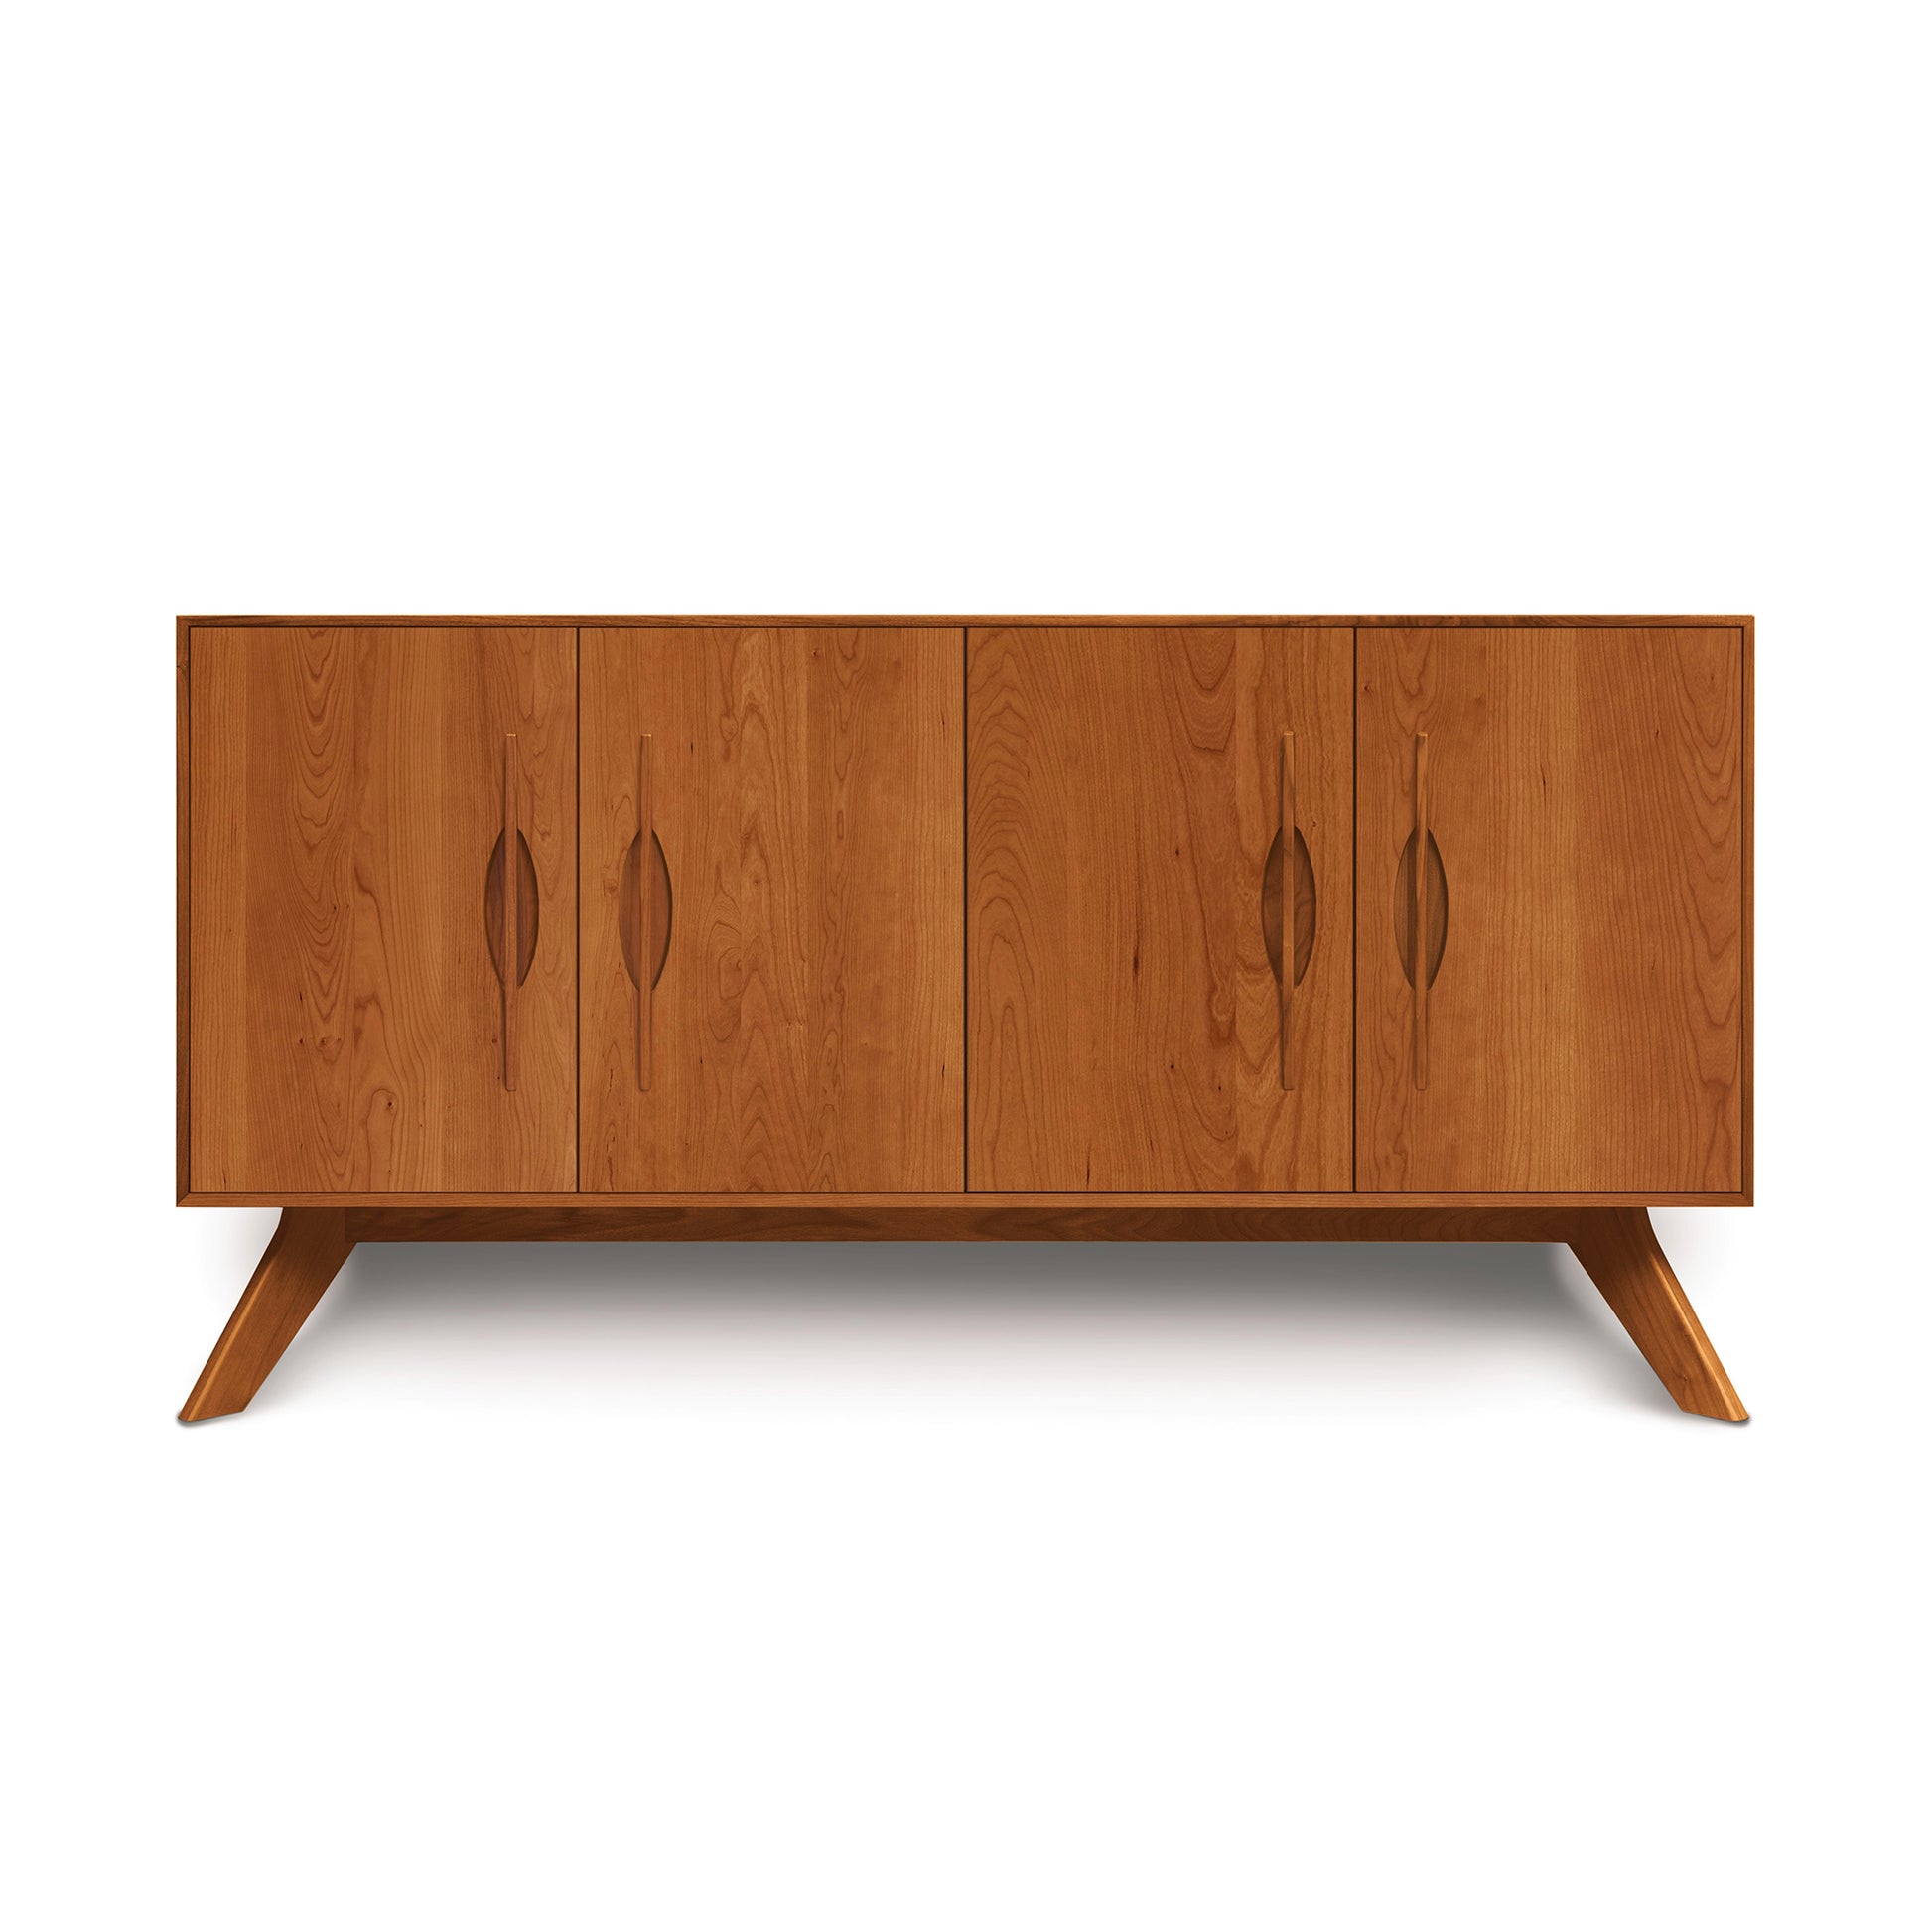 A handcrafted mid-century modern wooden Copeland Furniture Audrey 4-Door Buffet with four doors on angled legs.